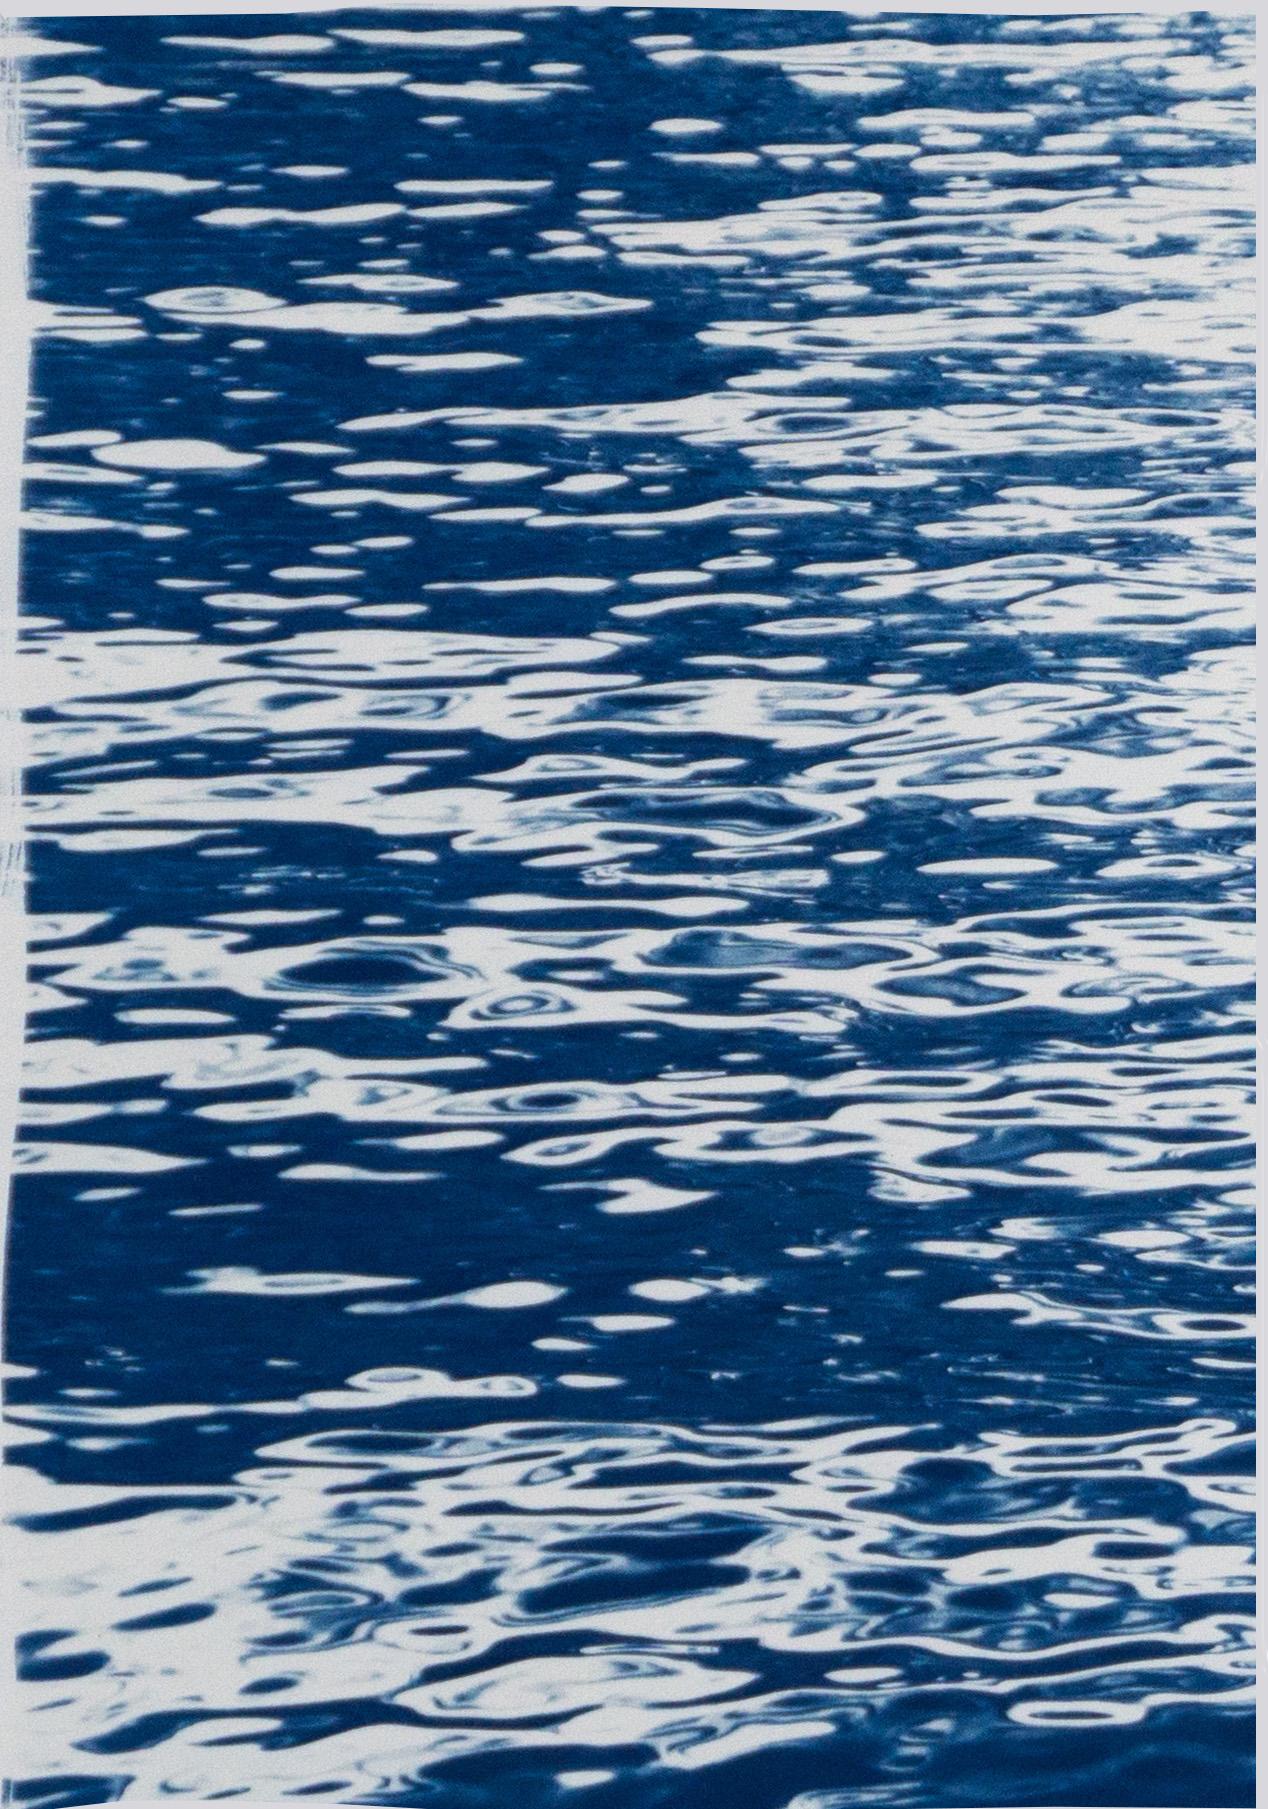 Moonlight Ripples over Lake Como, Nautical Cyanotype Triptych of Moving Water - Blue Landscape Photograph by Kind of Cyan